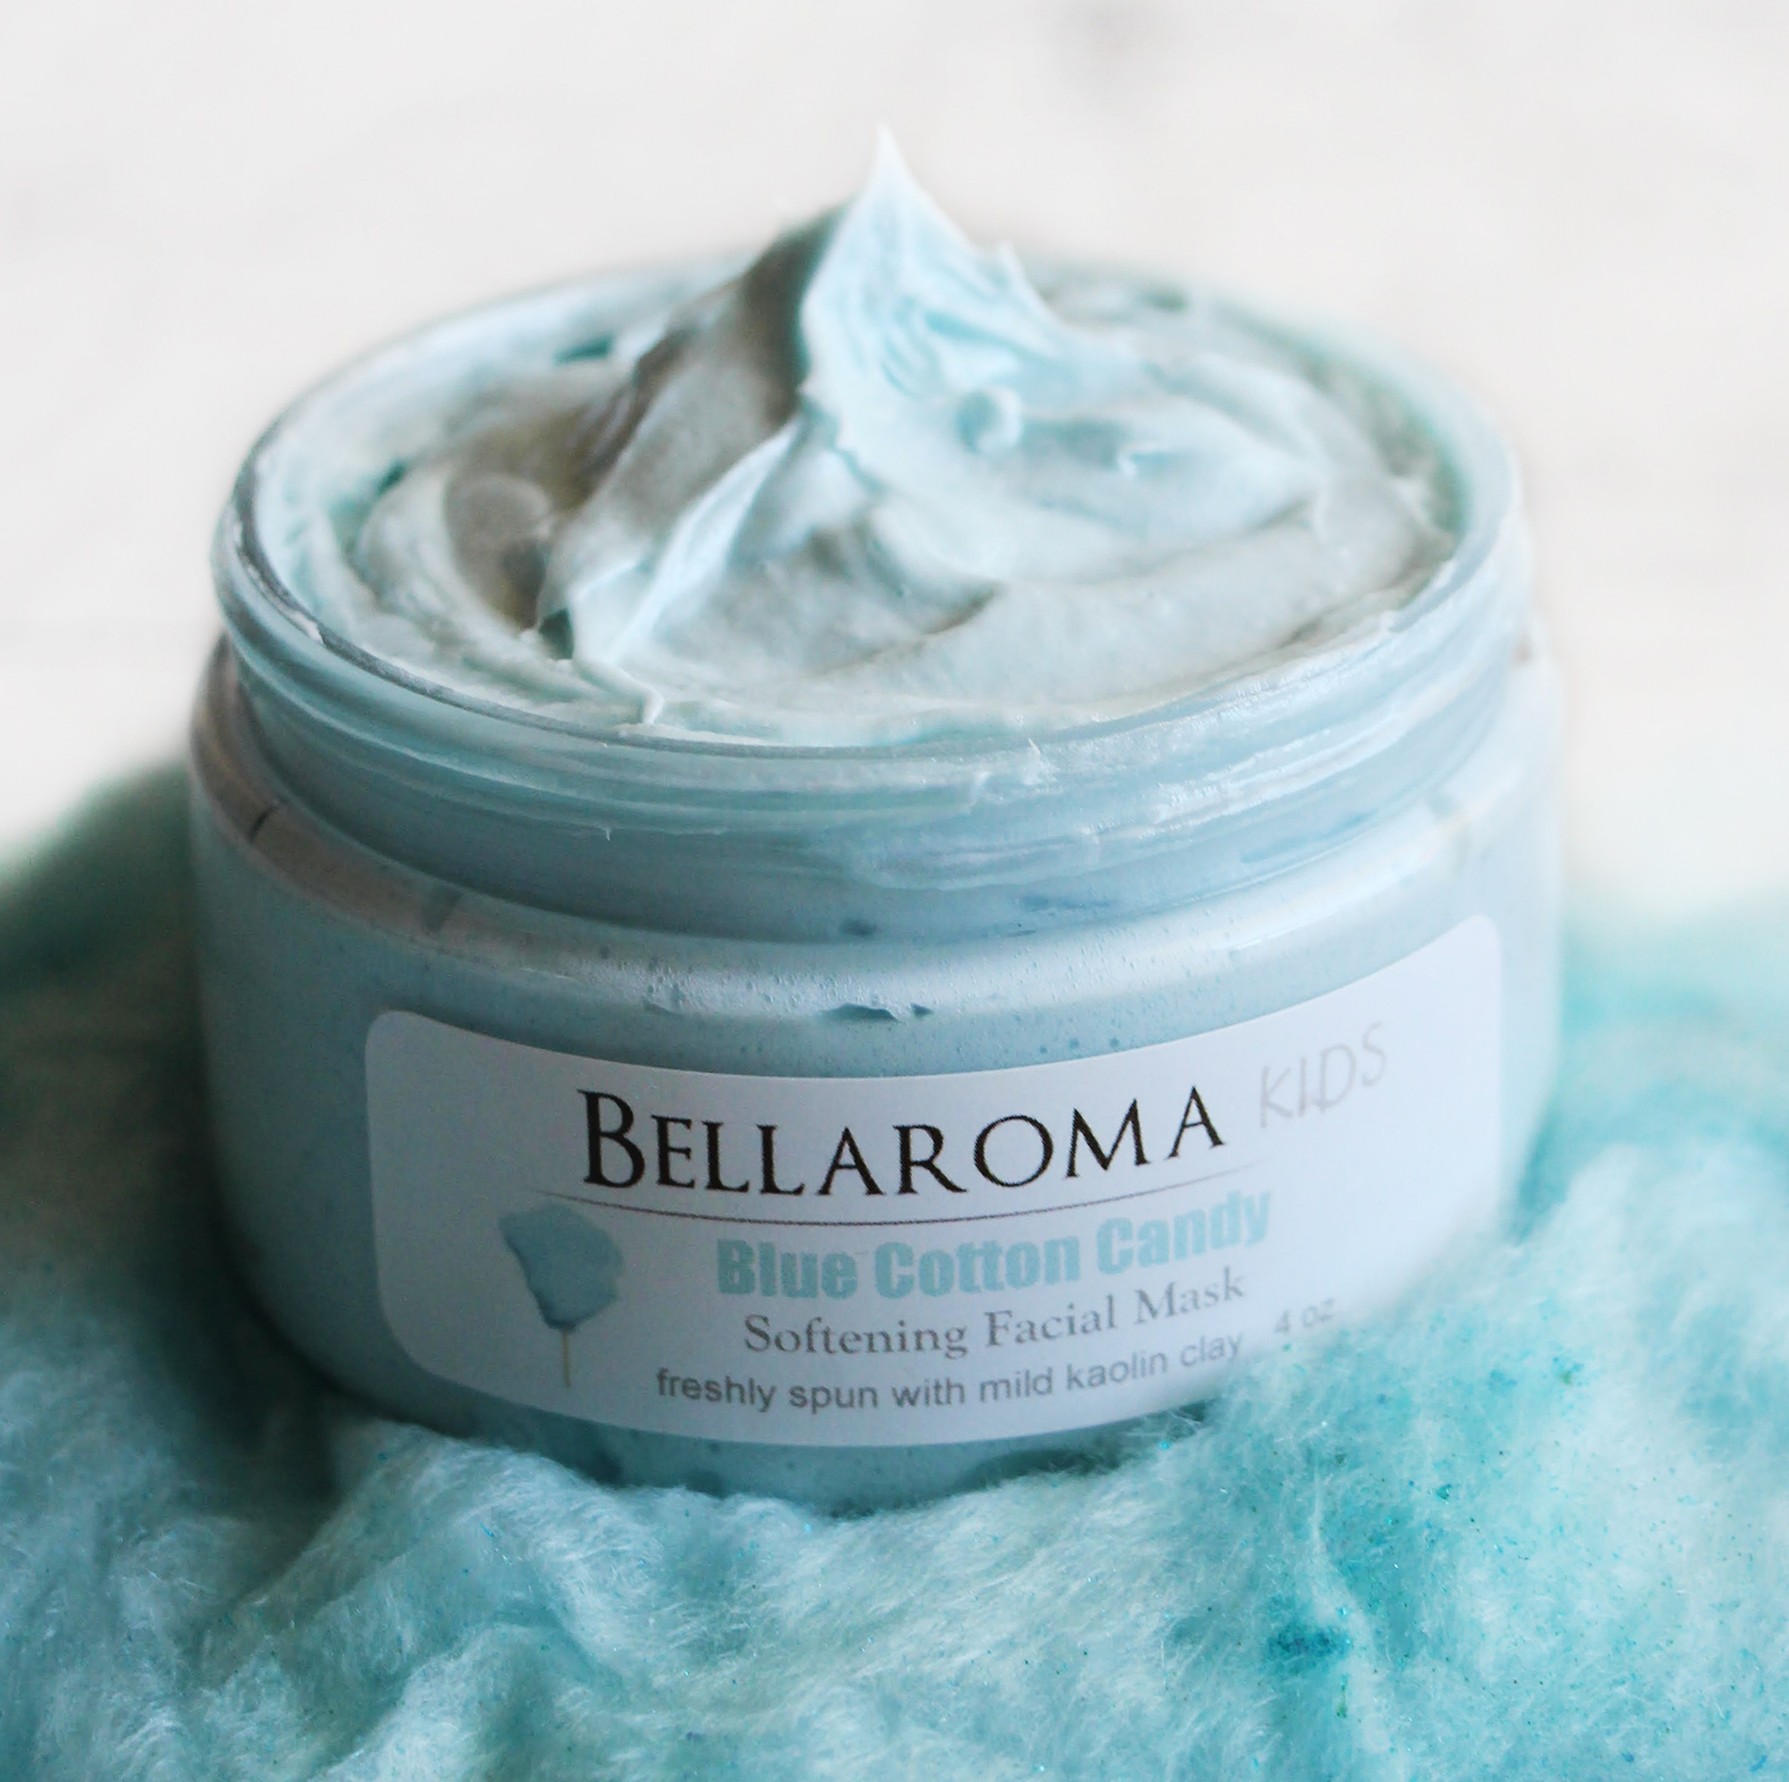 Blue Cotton Candy Softening Facial Mask